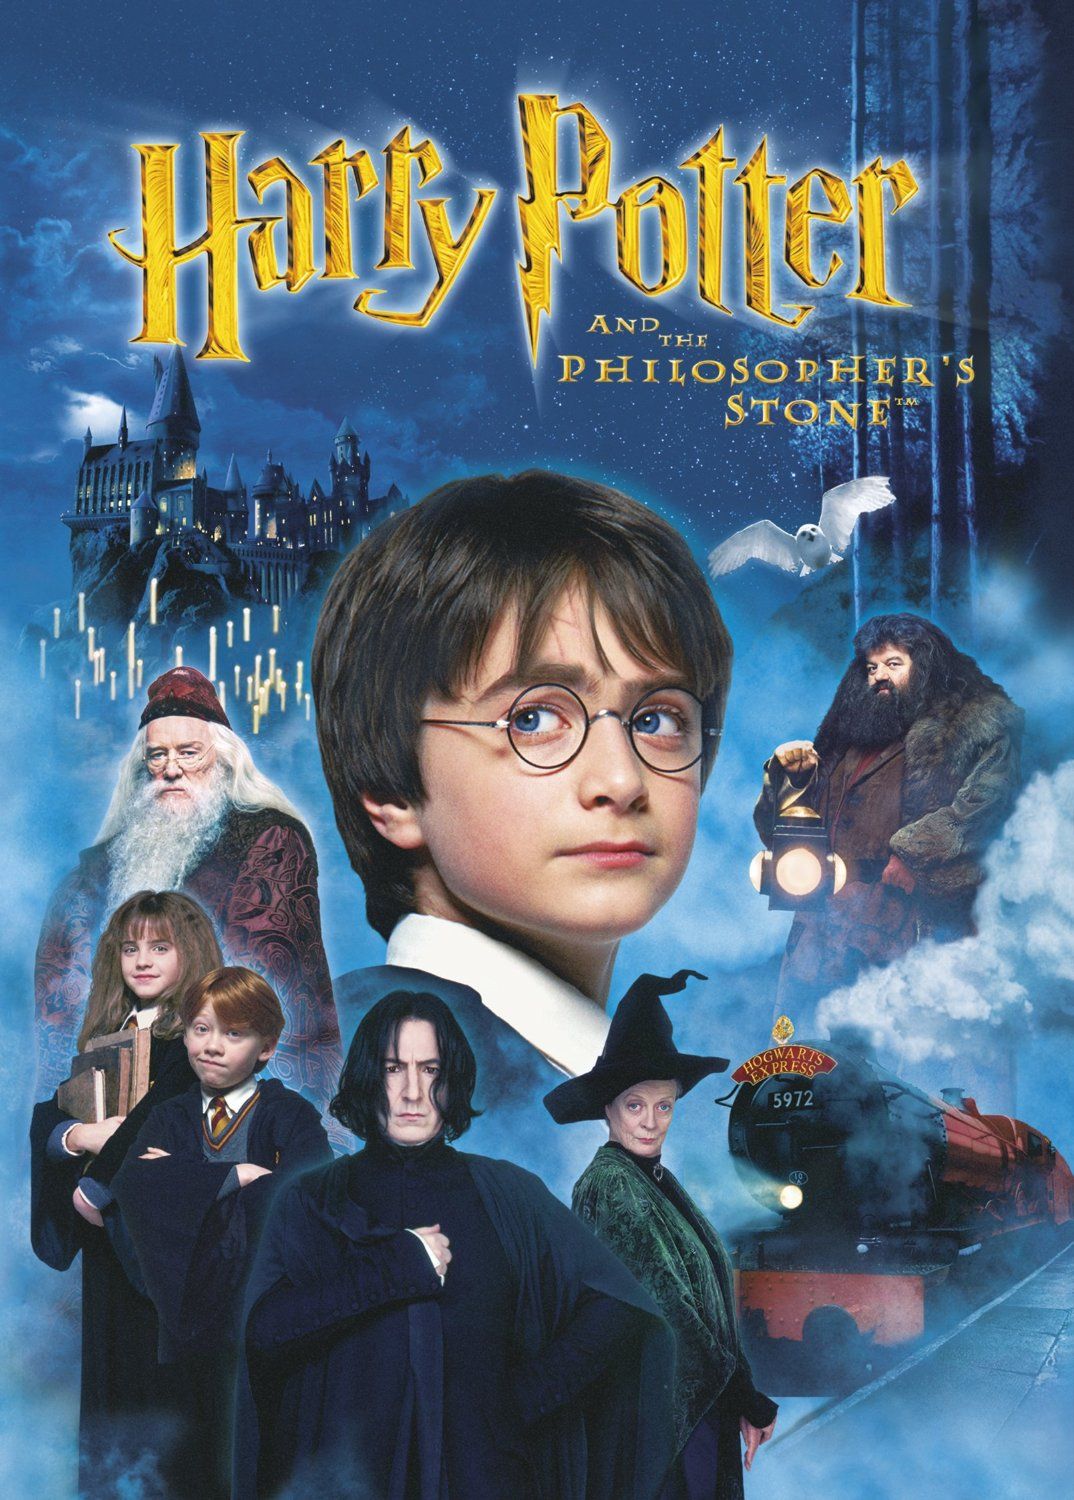 Harry Potter And The Philosopher's Stone wallpaper, Movie, HQ Harry Potter And The Philosopher's Stone pictureK Wallpaper 2019